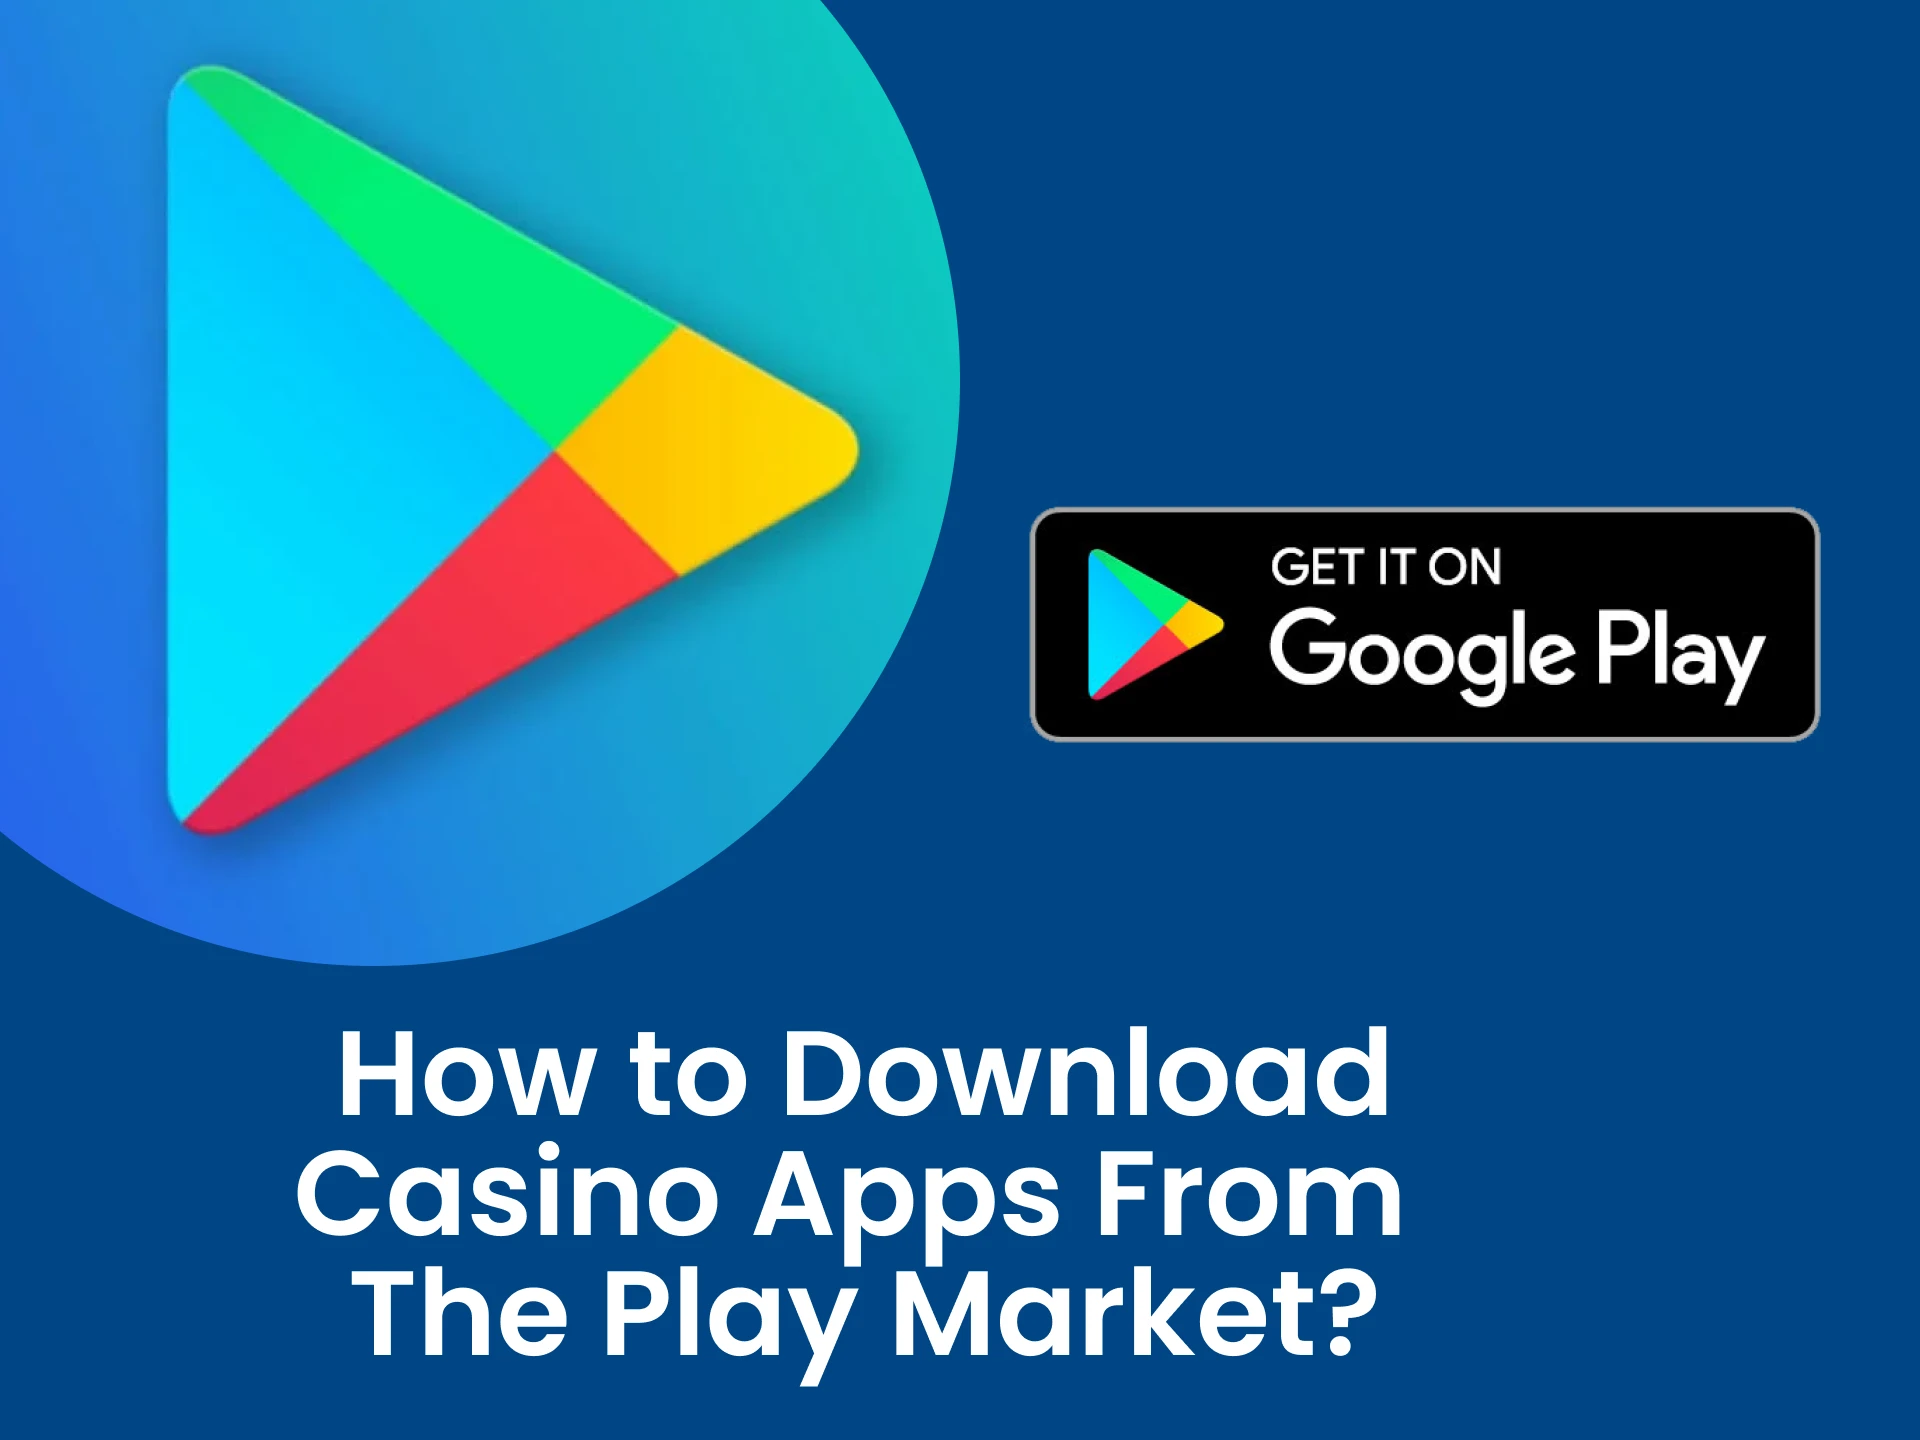 Download casino apps for Android through the Play Market.